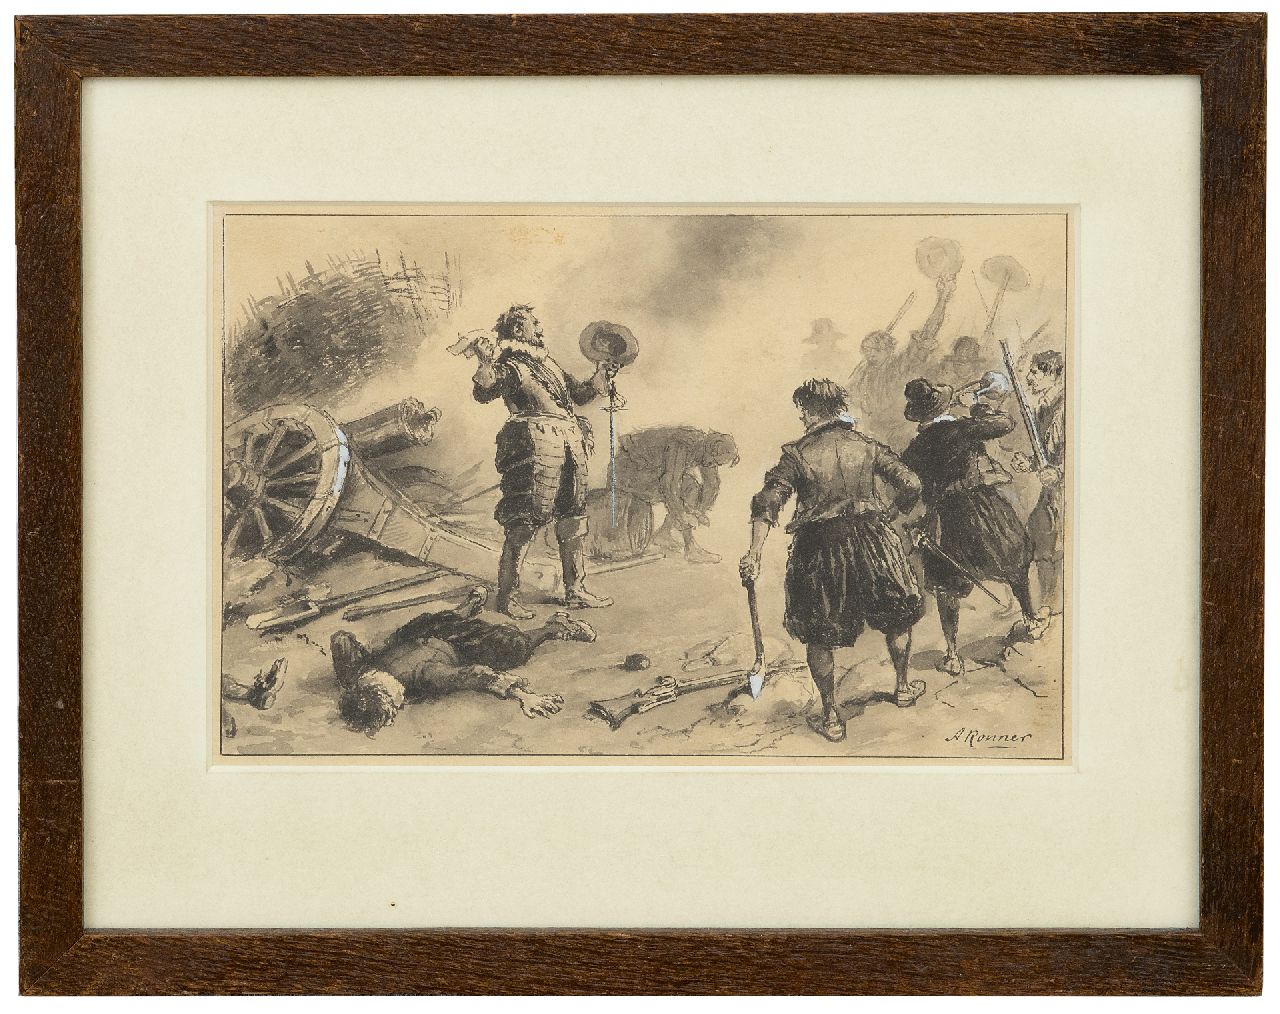 Ronner A.  | Alfred Ronner | Watercolours and drawings offered for sale | Victory on the battle field, ink and gouache on paper 14.7 x 21.7 cm, signed l.r.